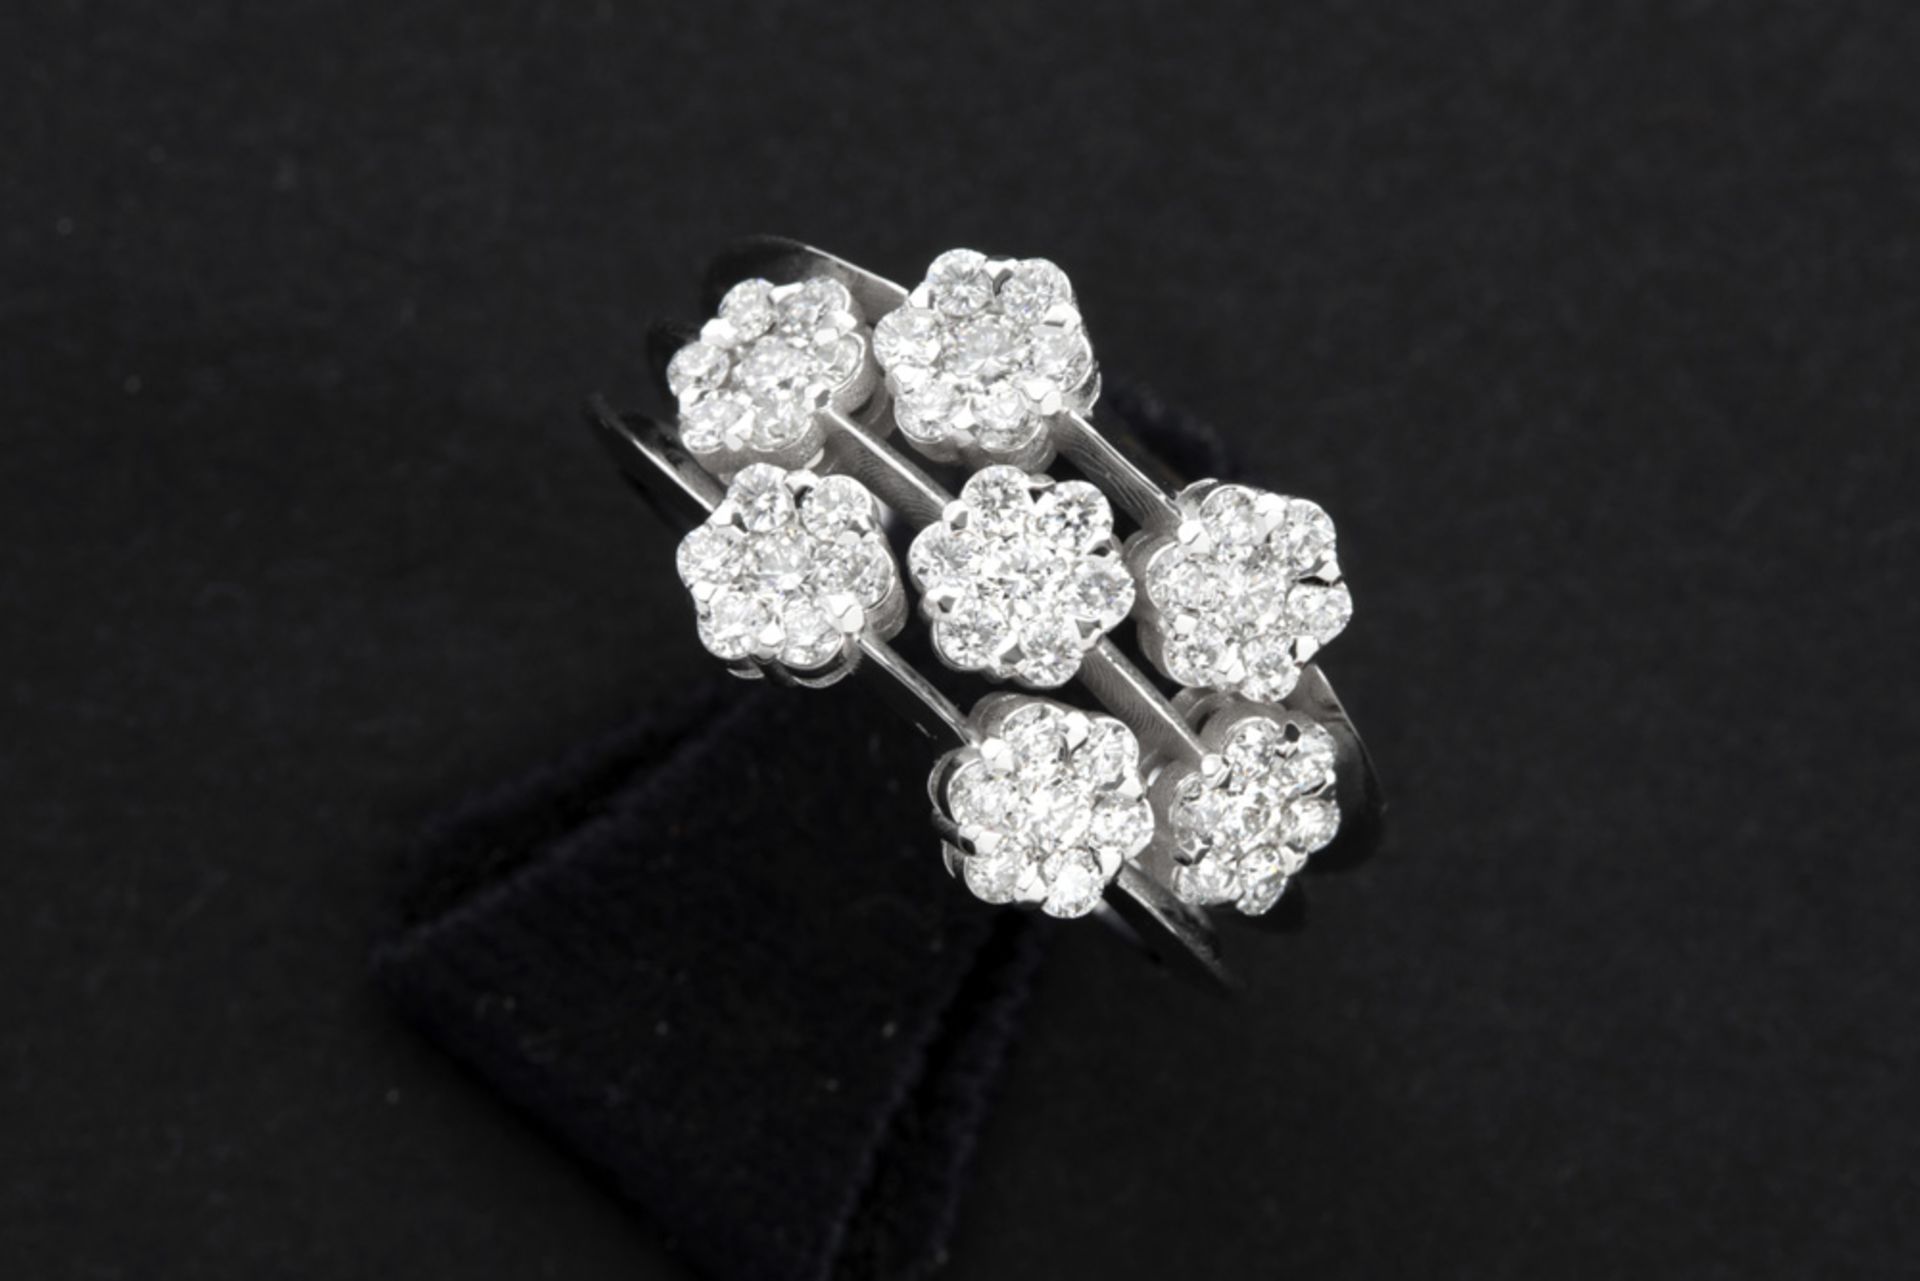 ring in white gold (18 carat) with 0,85 carat of very high quality brilliant cut diamonds||